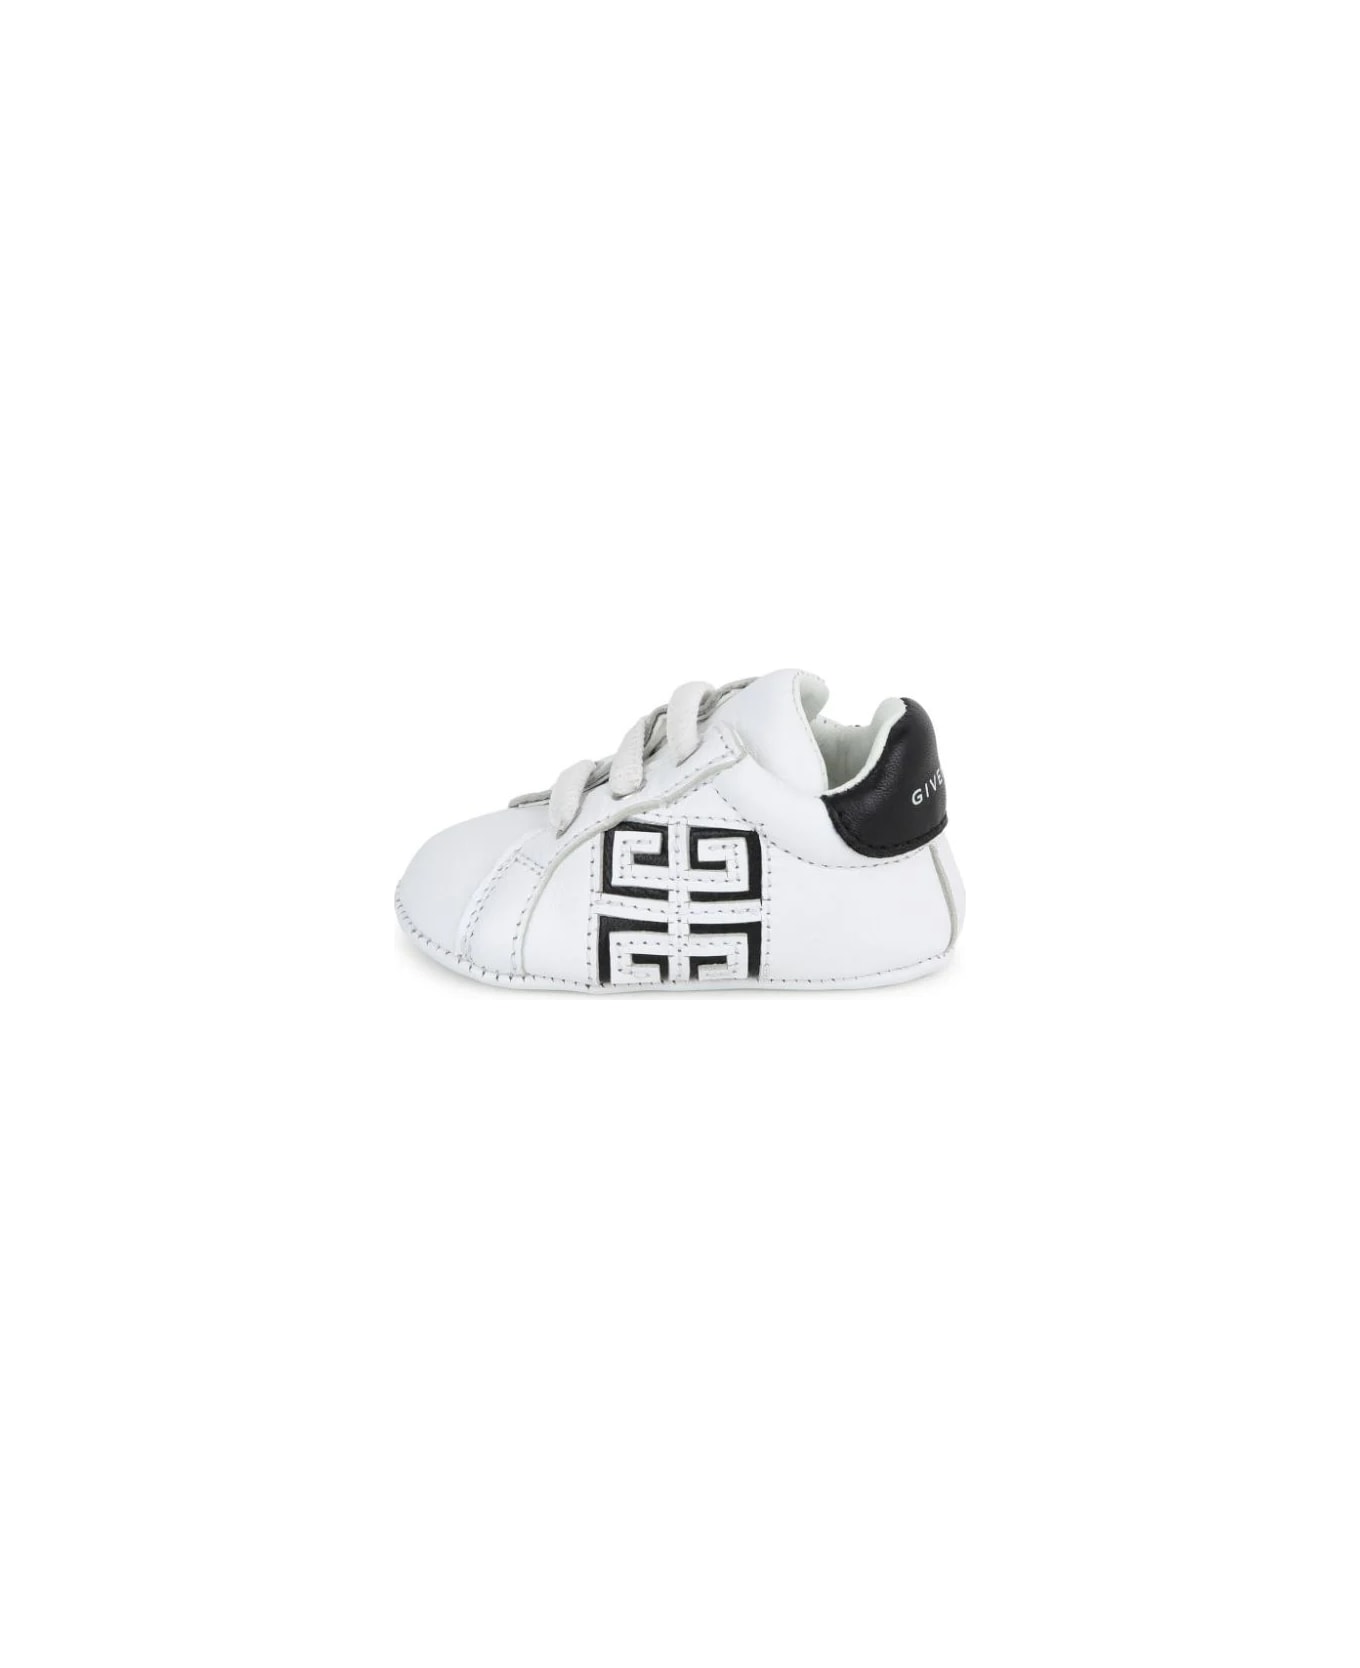 Givenchy White And Black 4g Sneakers - White